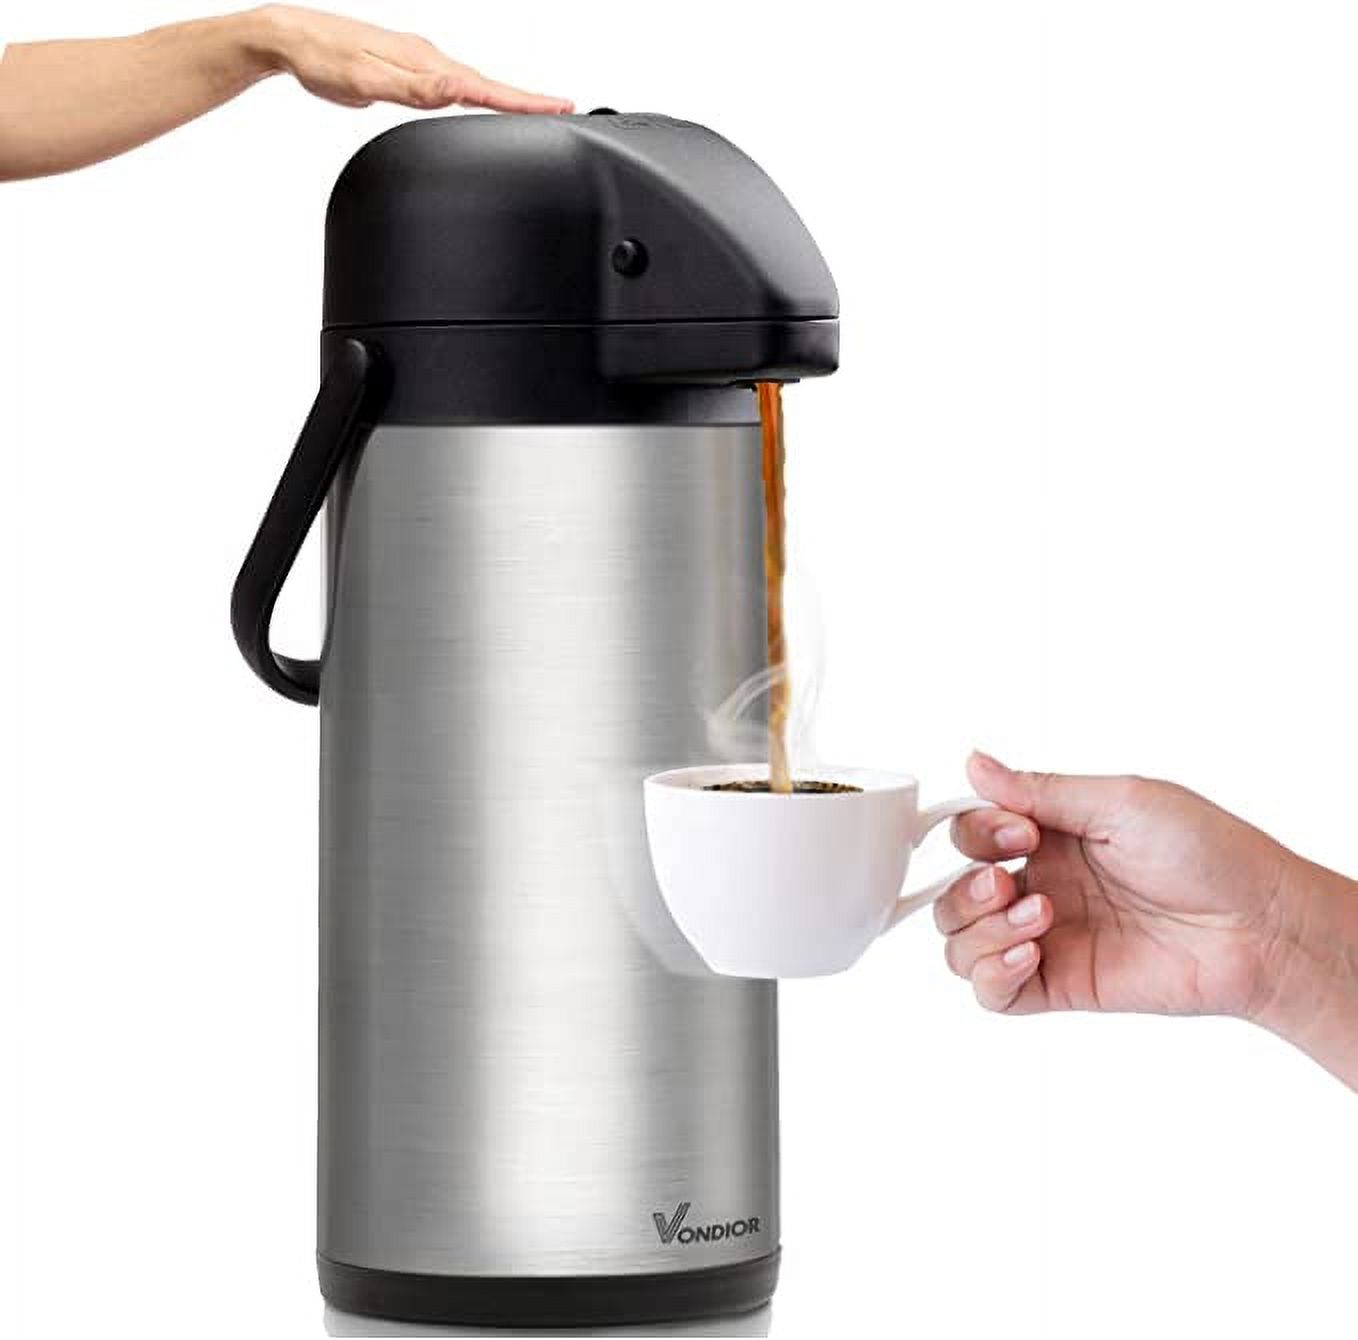 Vondior Airpot Coffee Dispenser with Pump - Insulated Stainless Steel Coffee Carafe (85 oz) - image 1 of 7